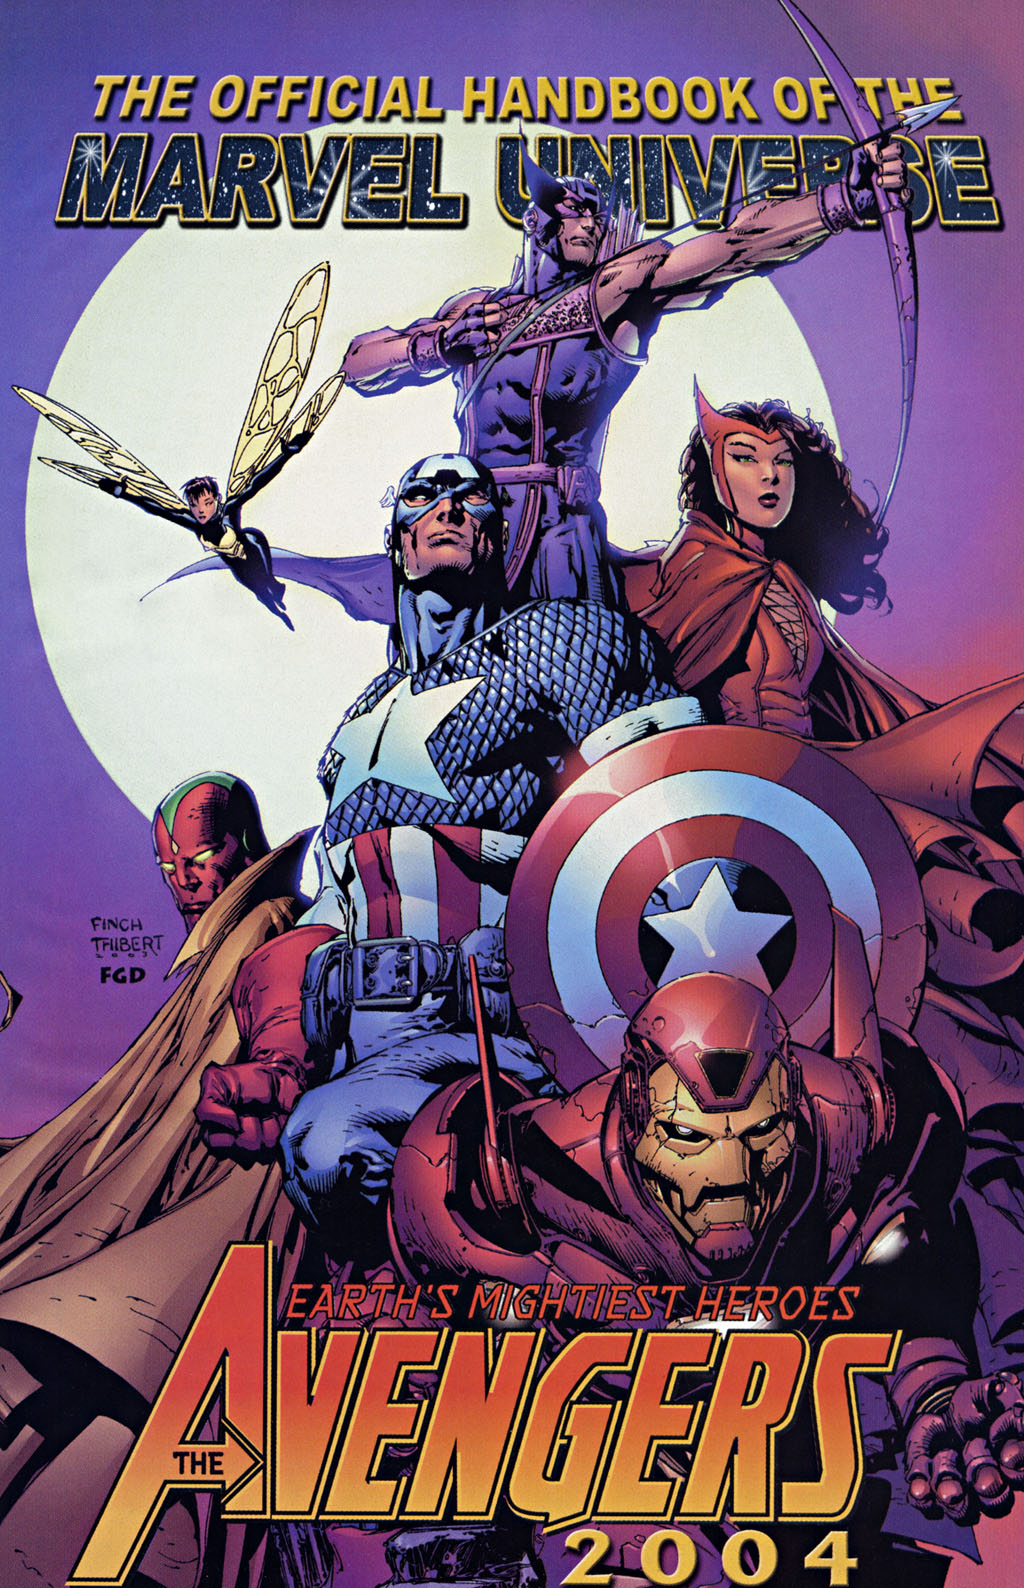 Read online The Official Handbook of the Marvel Universe: The Avengers comic -  Issue # Full - 4